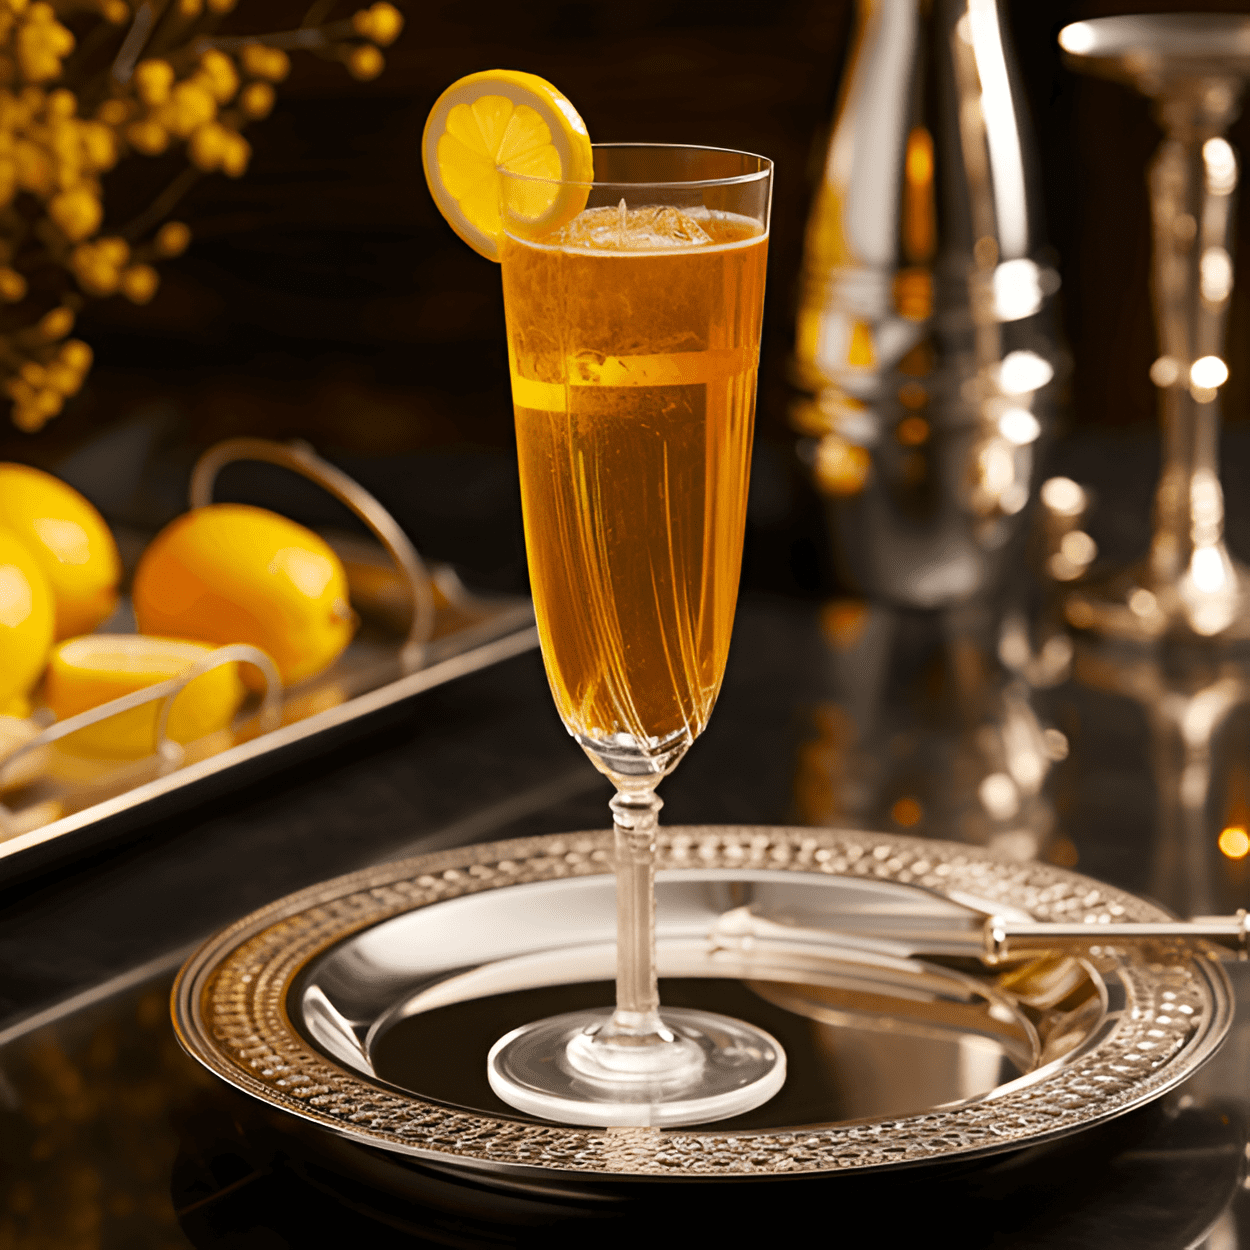 Trump Tower Cocktail Recipe - The Trump Tower cocktail is a bold, robust drink with a strong whiskey base. The addition of the orange liqueur and lemon juice adds a sweet and sour balance, while the hint of honey gives it a smooth, rich finish.